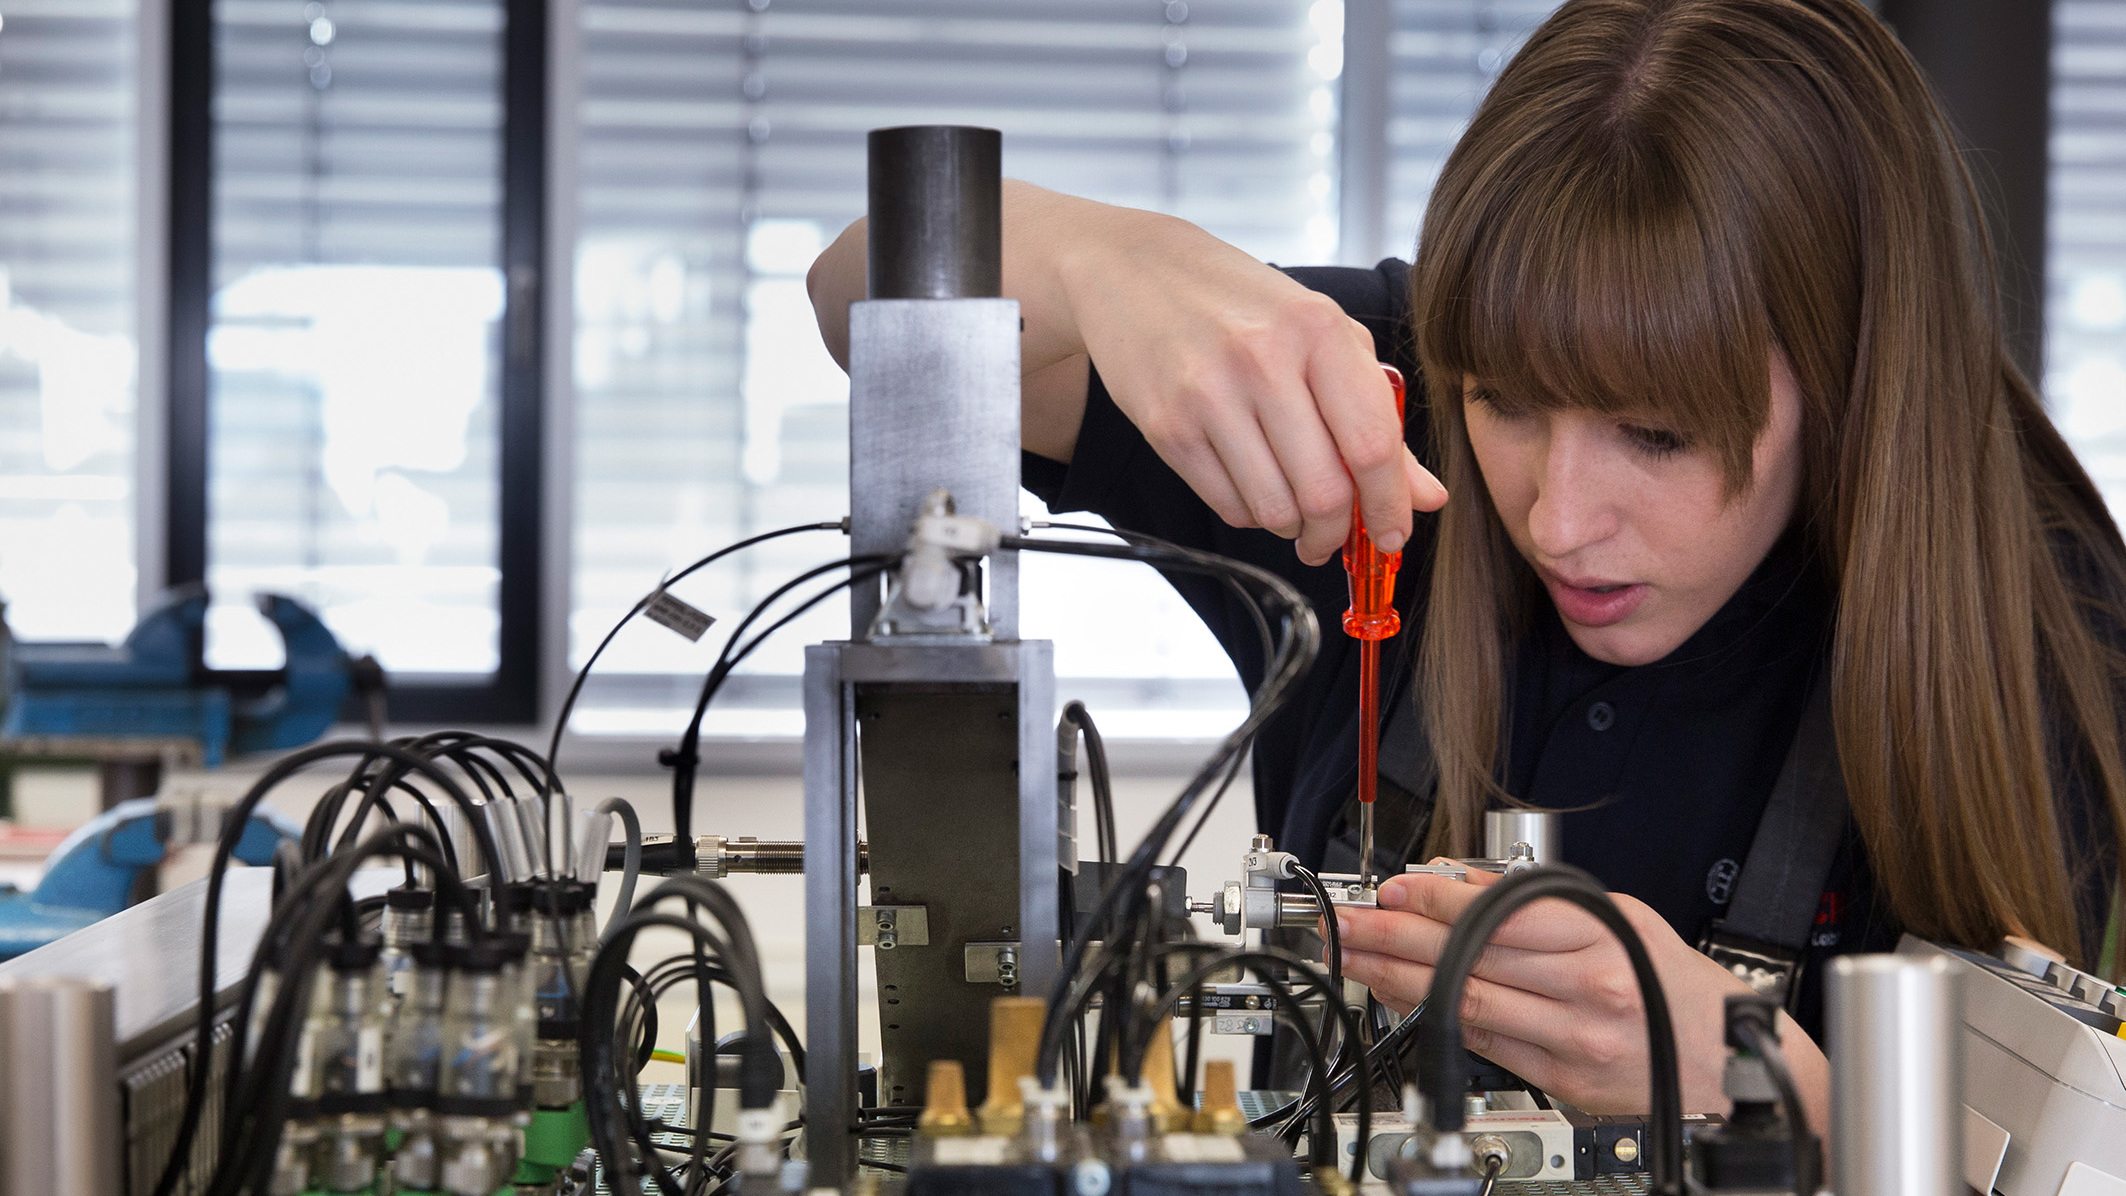 Bosch continues southern Europe apprenticeship initiative – combating youth unemployment